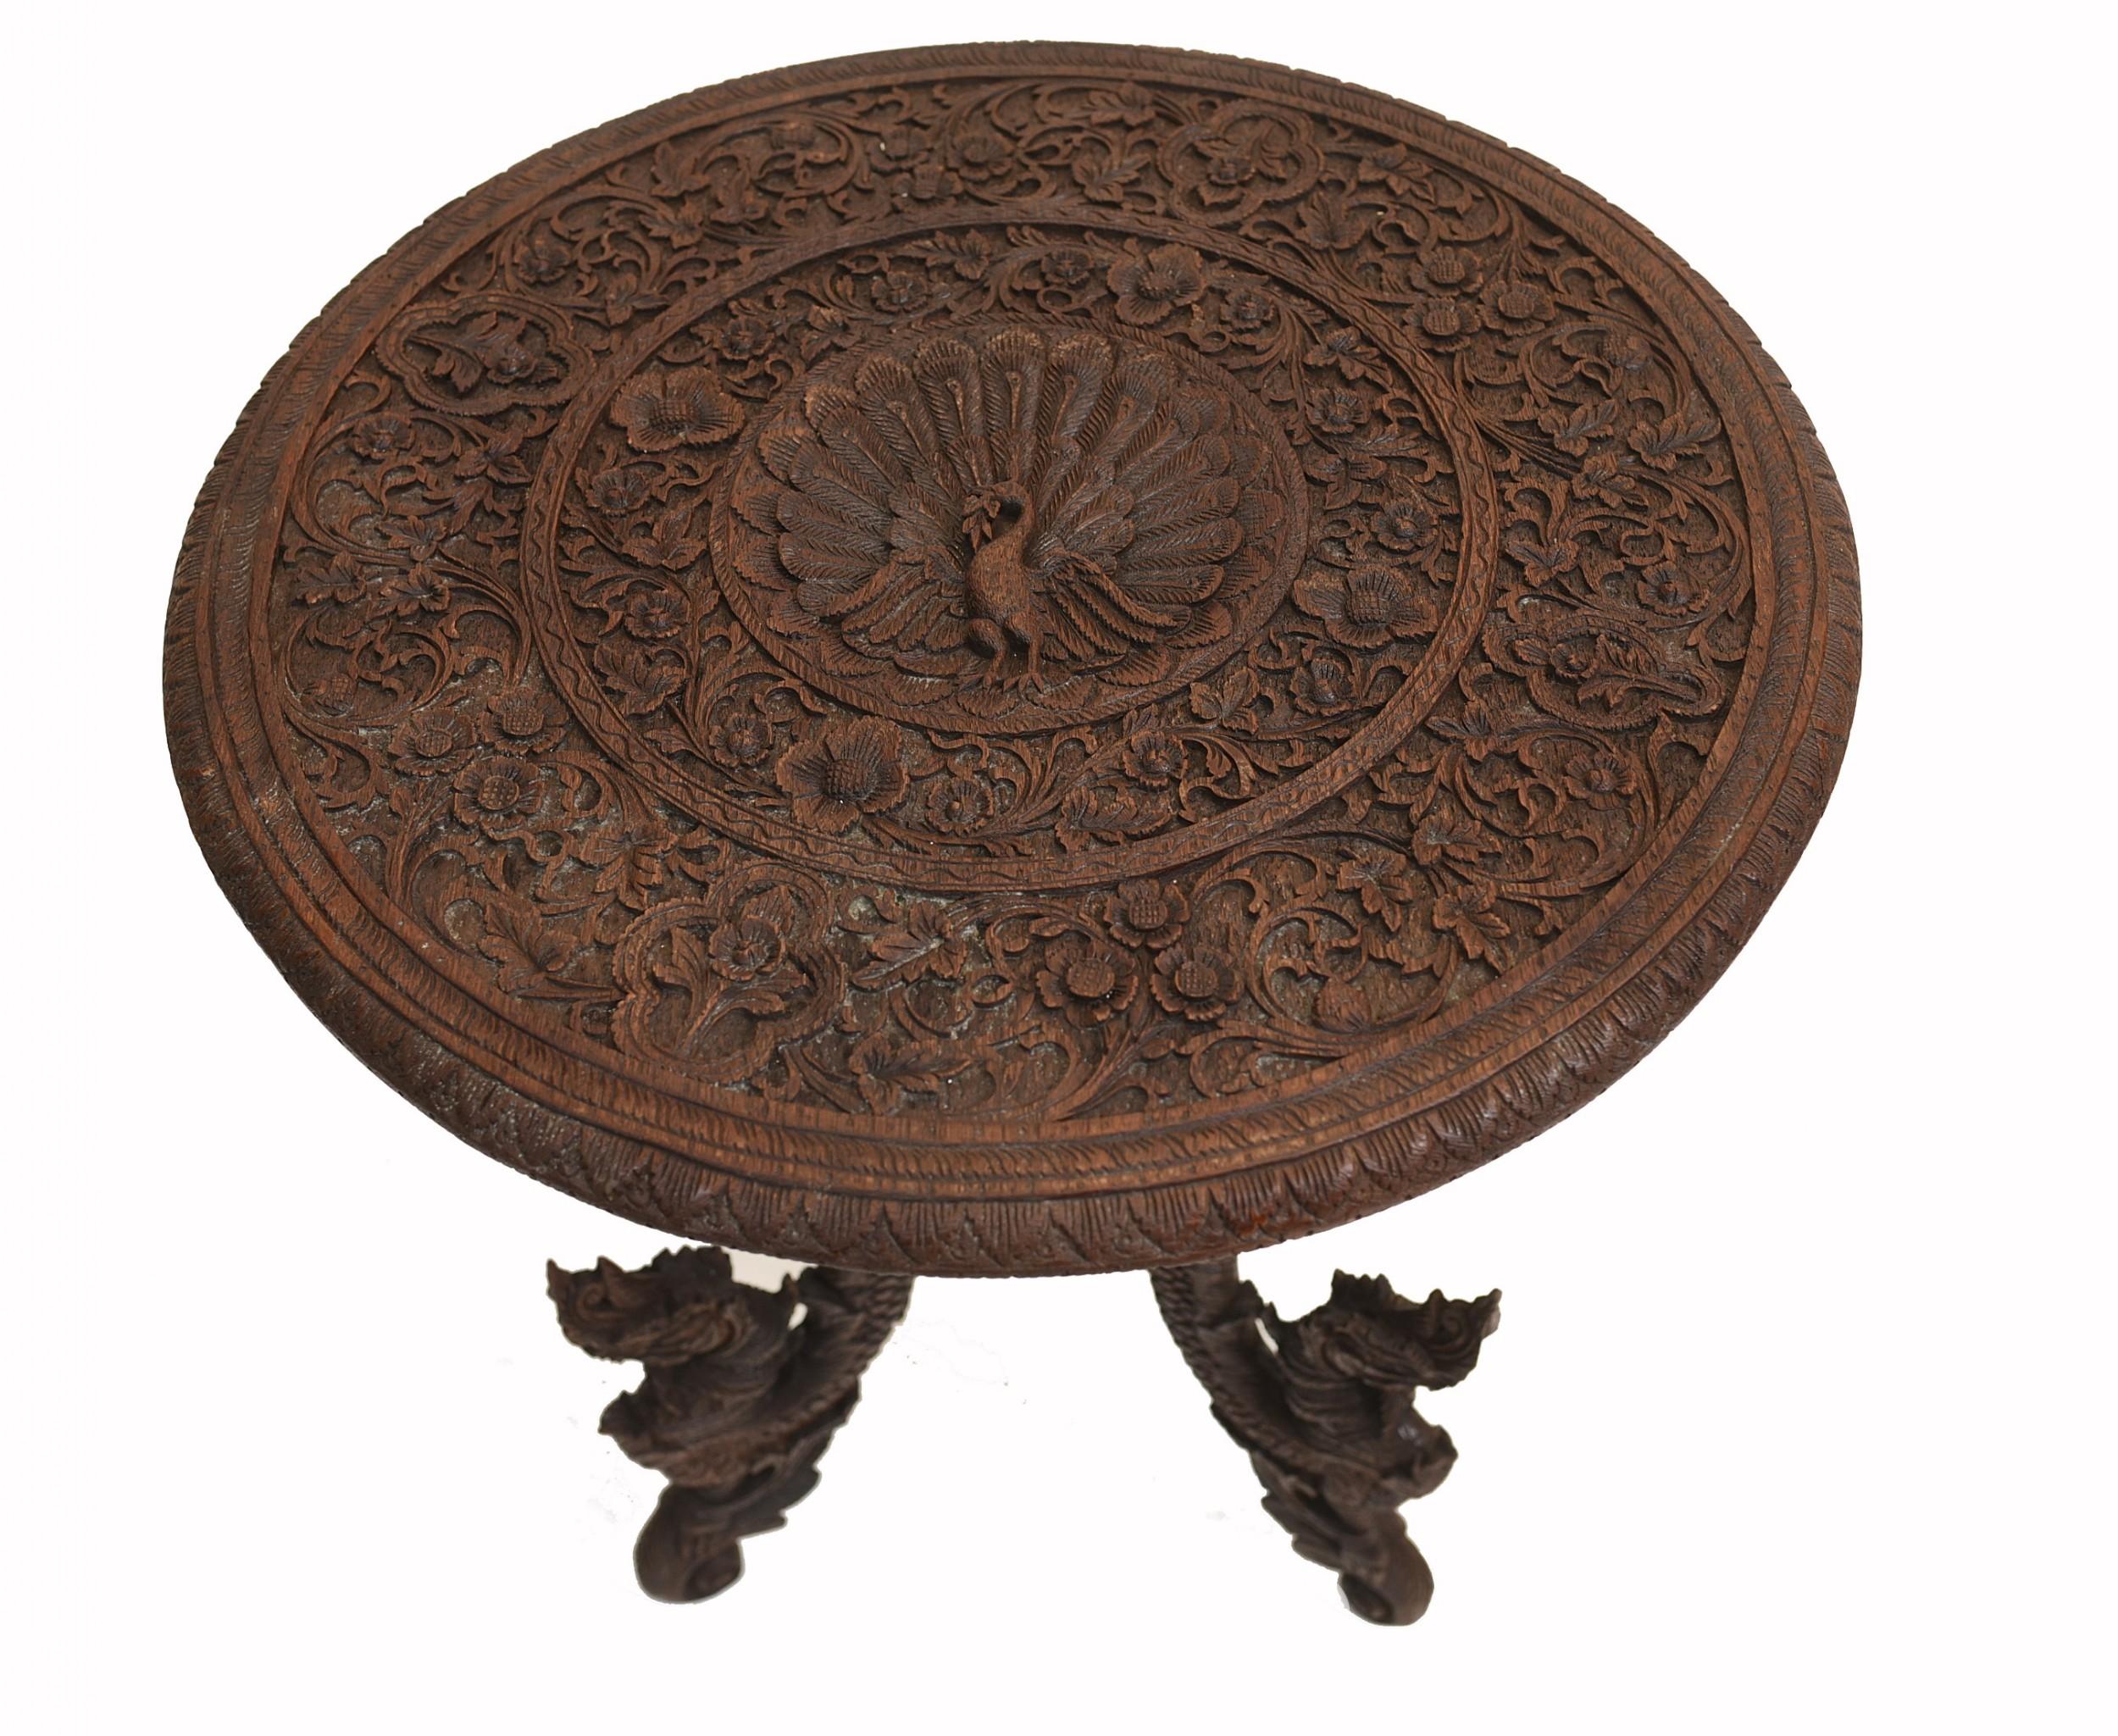 Stylish Burmese antique side table
Classic Burmese furniture with amazingly intricate hand carved details
We date this to circa 1890
Antiques Herts showroom, just 25 minutes north of London
Offered in great shape ready for home use right